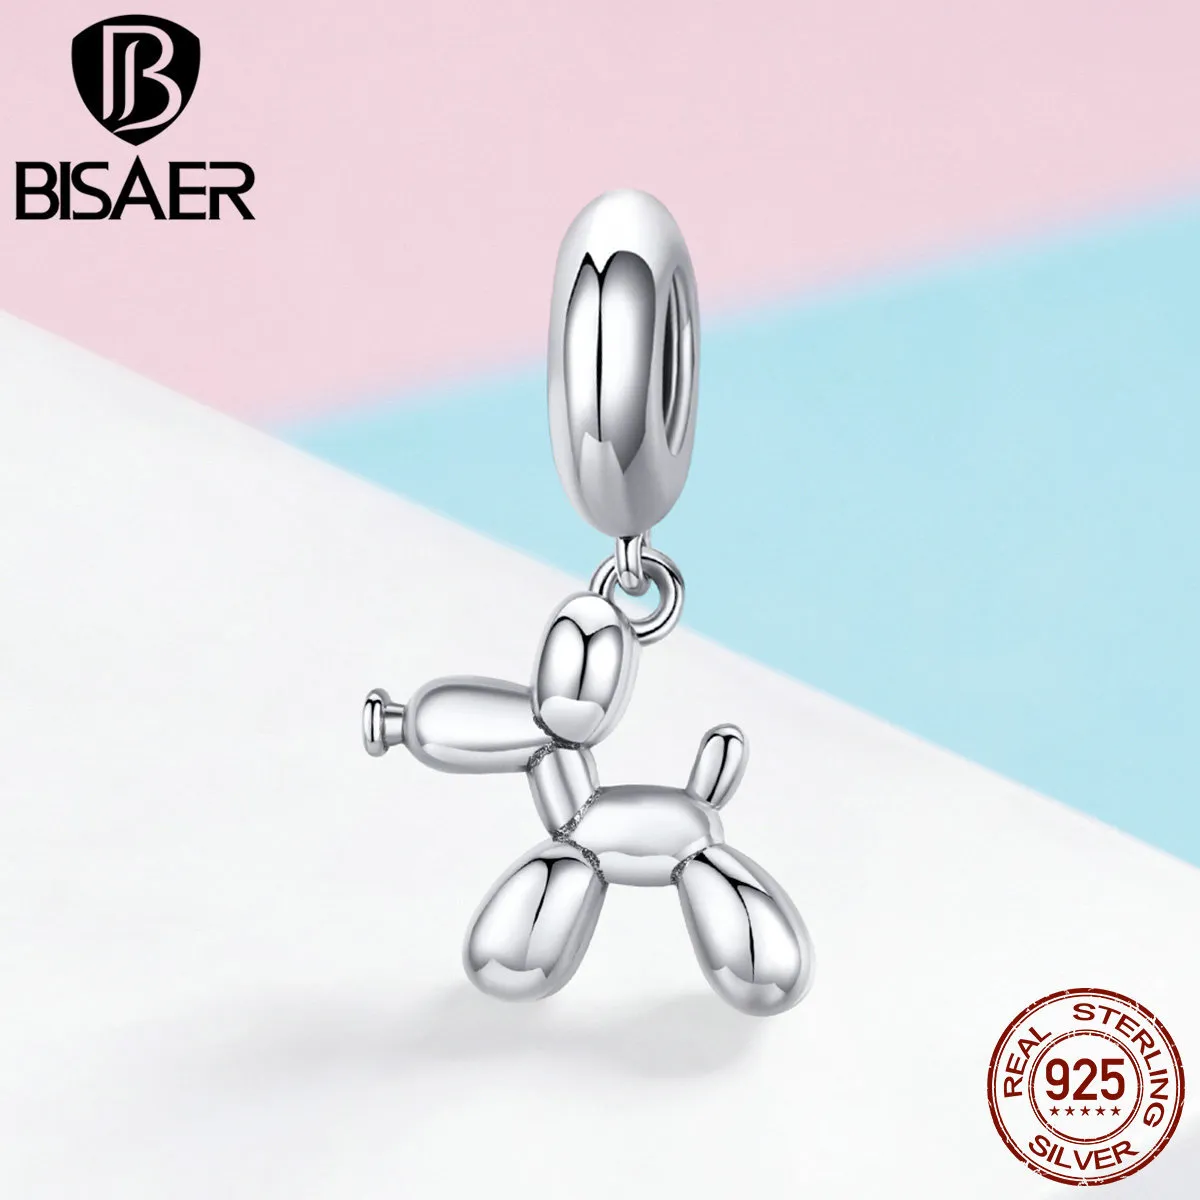 BISAER 925 Sterling Silver Balloon Dog Tools Charms Puppet Dog Beads fit Bracelet Beads for Silver 925 Jewelry Making ECC981 Q0225323h